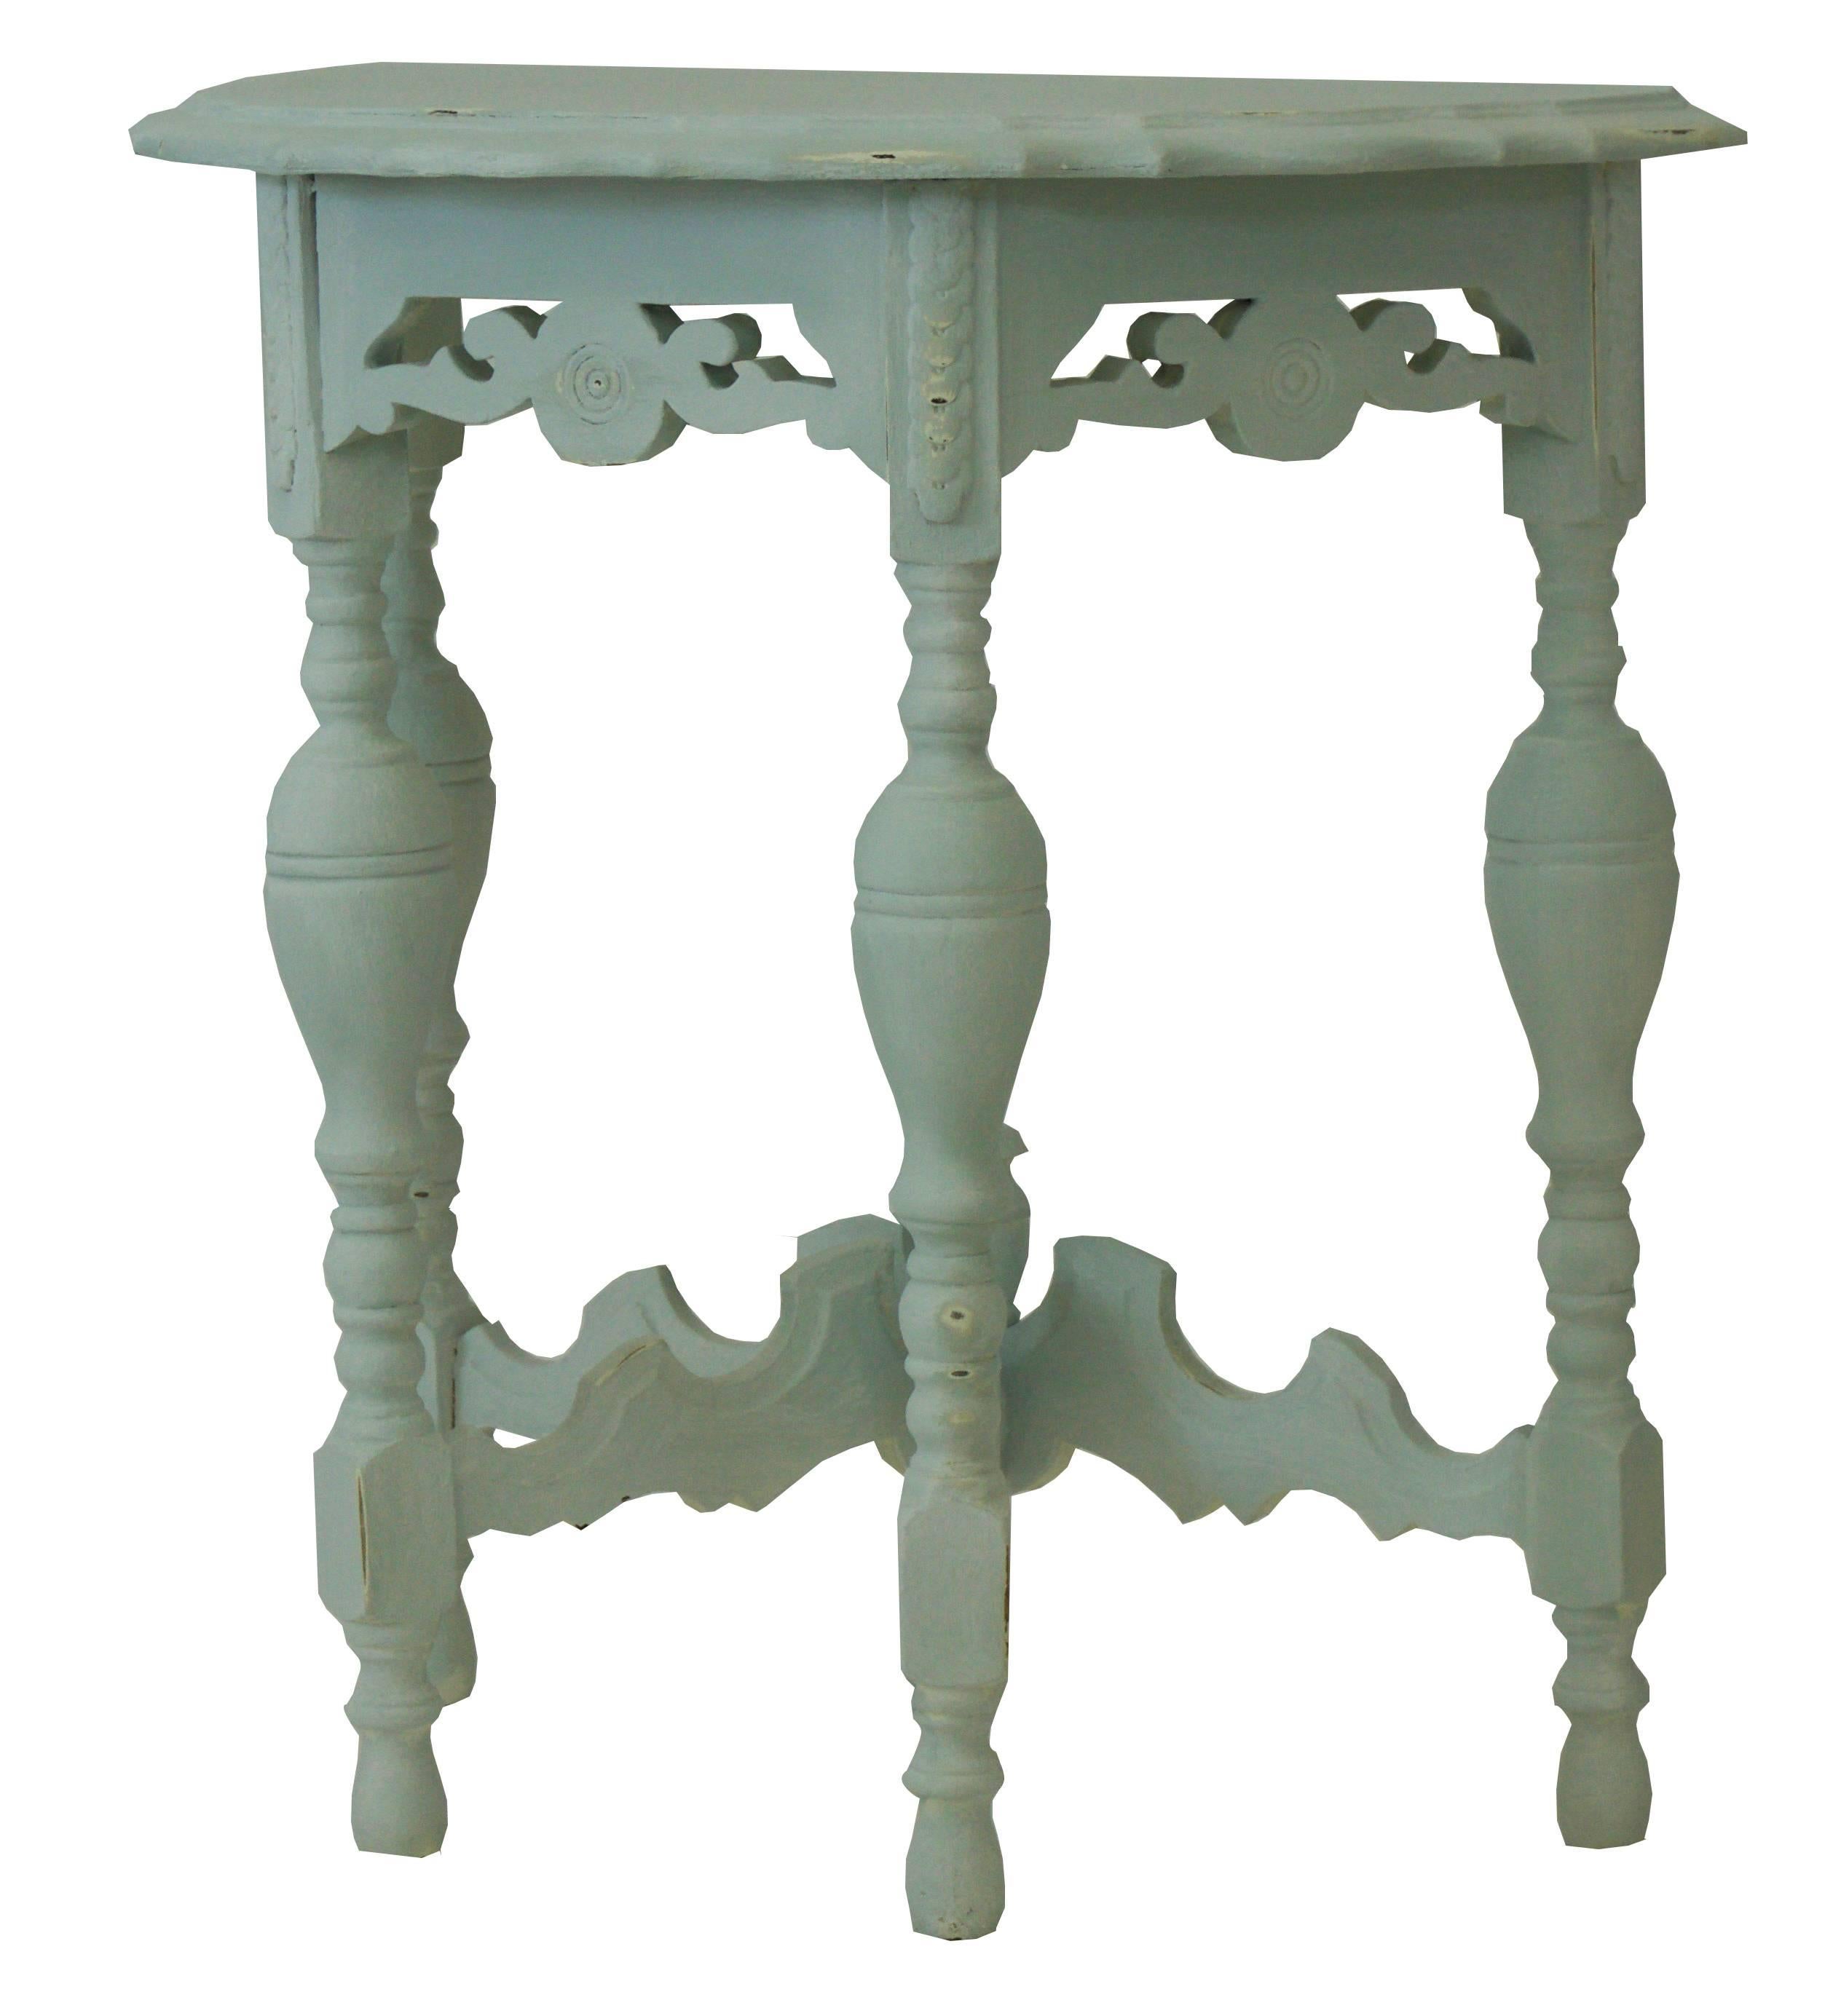 Vintage carved Demilune Table. A great little sized table in a beautiful grey/blue color.